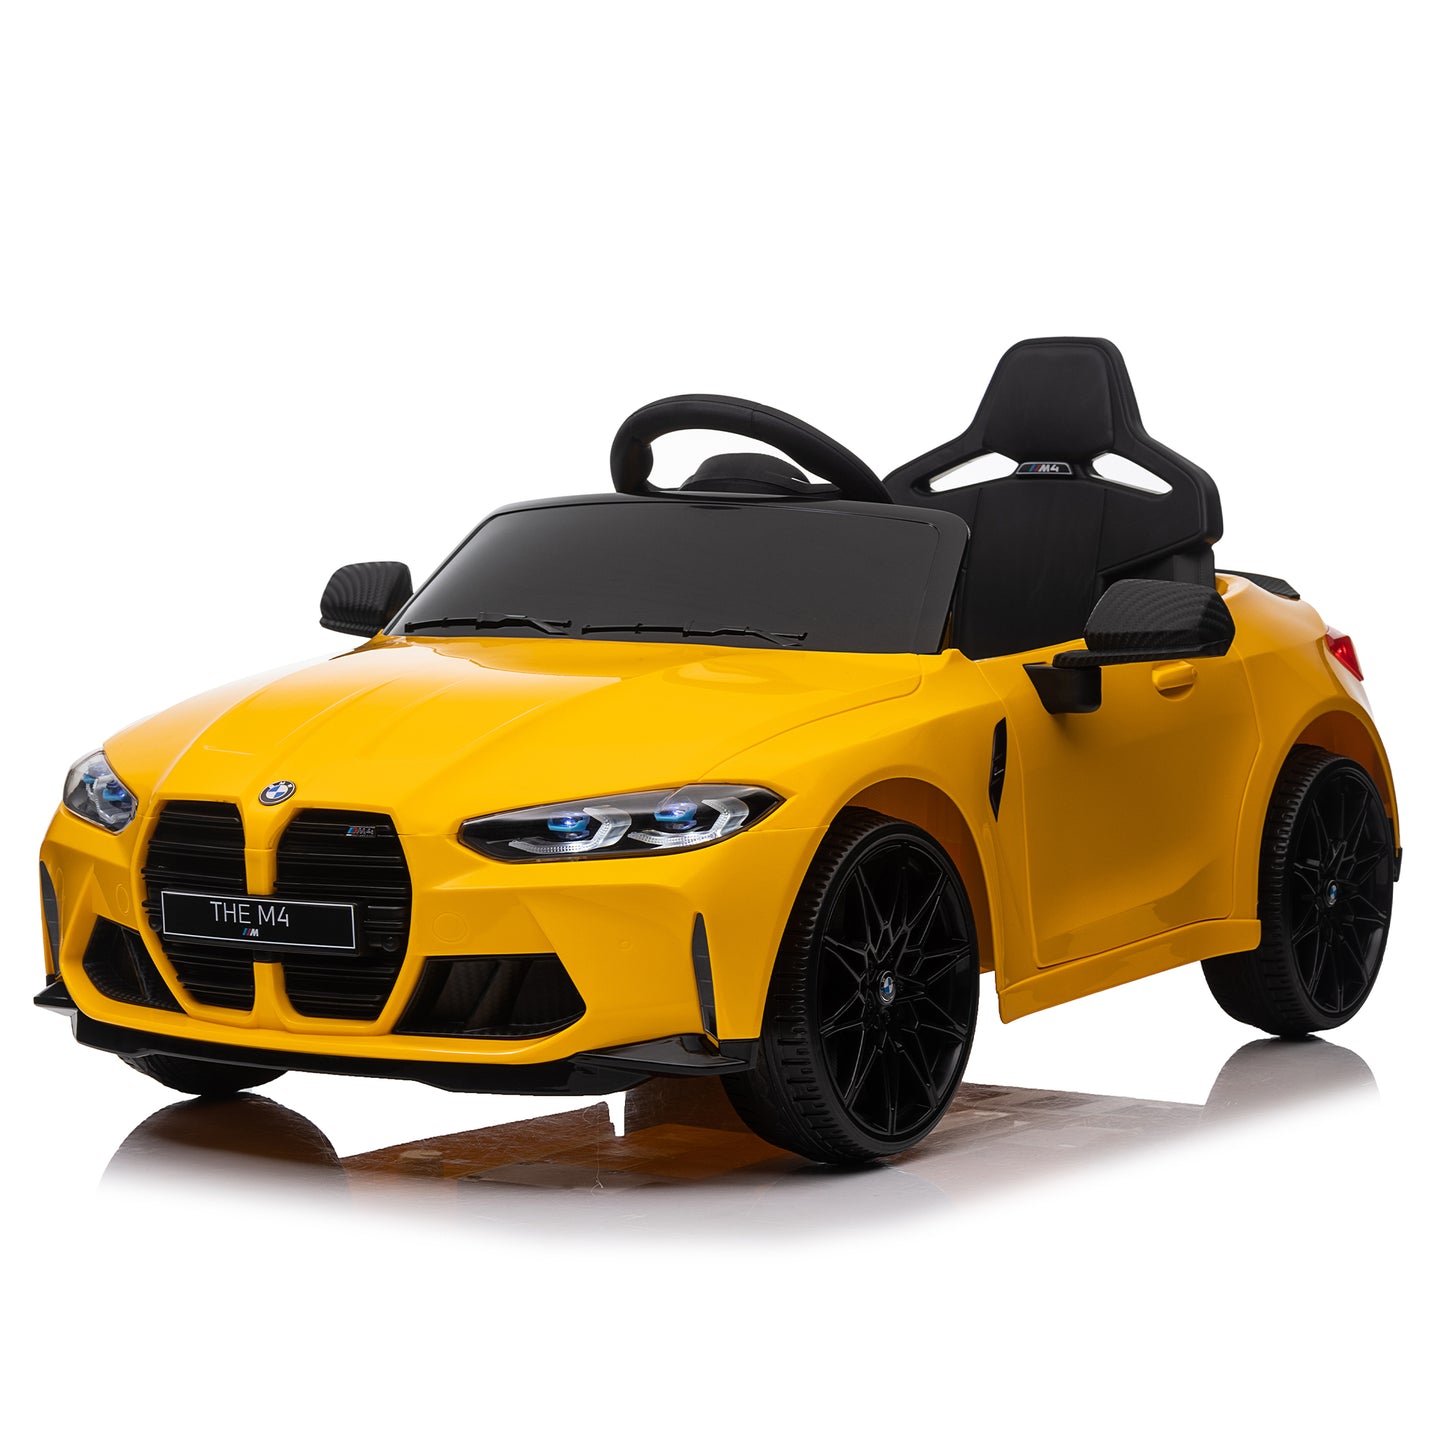 Yellow BMW M4 12v Kids ride on toy car 2.4G W/Parents Remote Control.